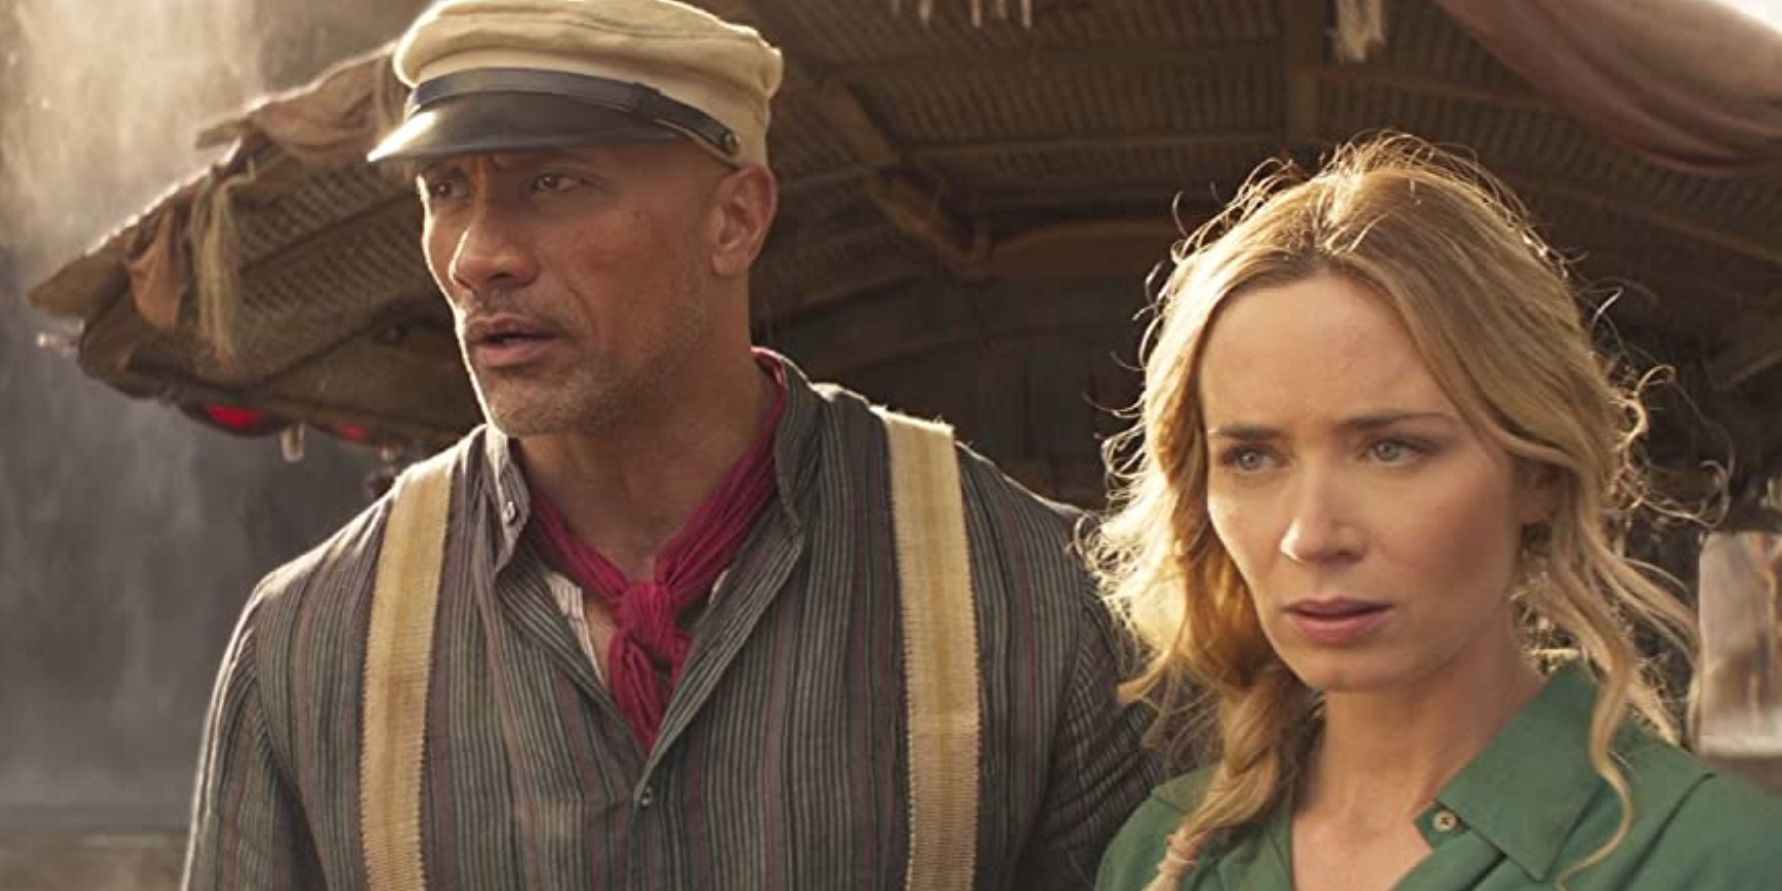 Dwayne Johnson and Emily Blunt in 'Jungle Cruise'